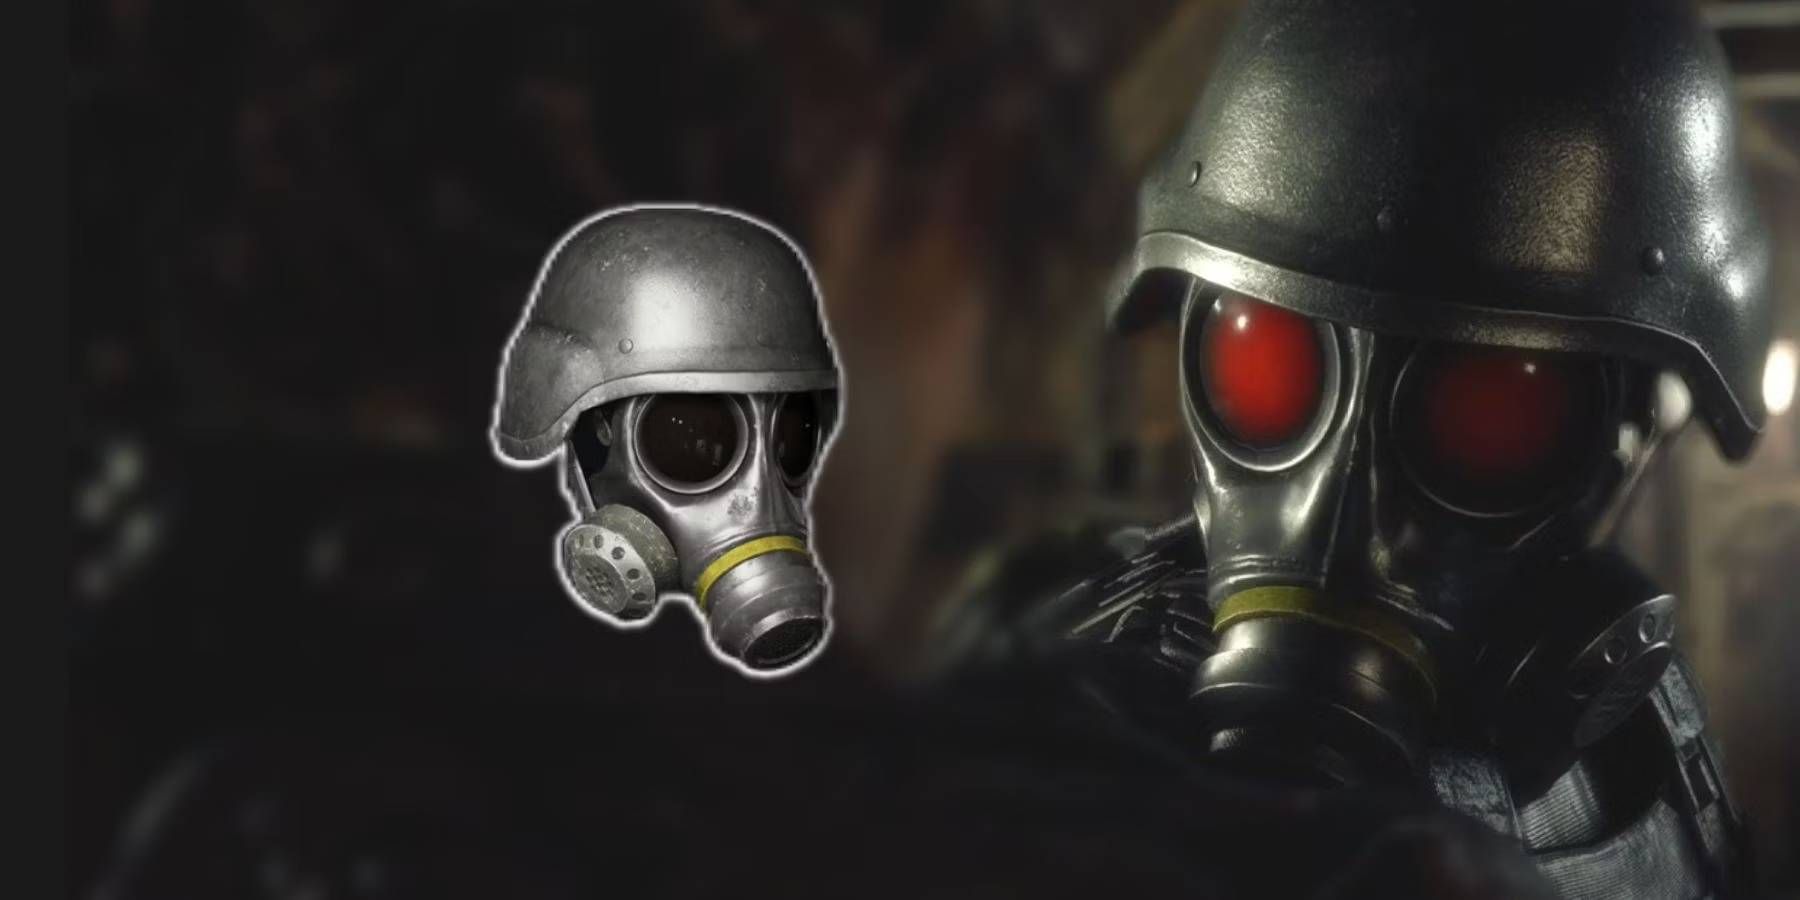 Resident Evil 4 Remake Gas Mask Accessory Resembling Hunk from Mercenaries Mode